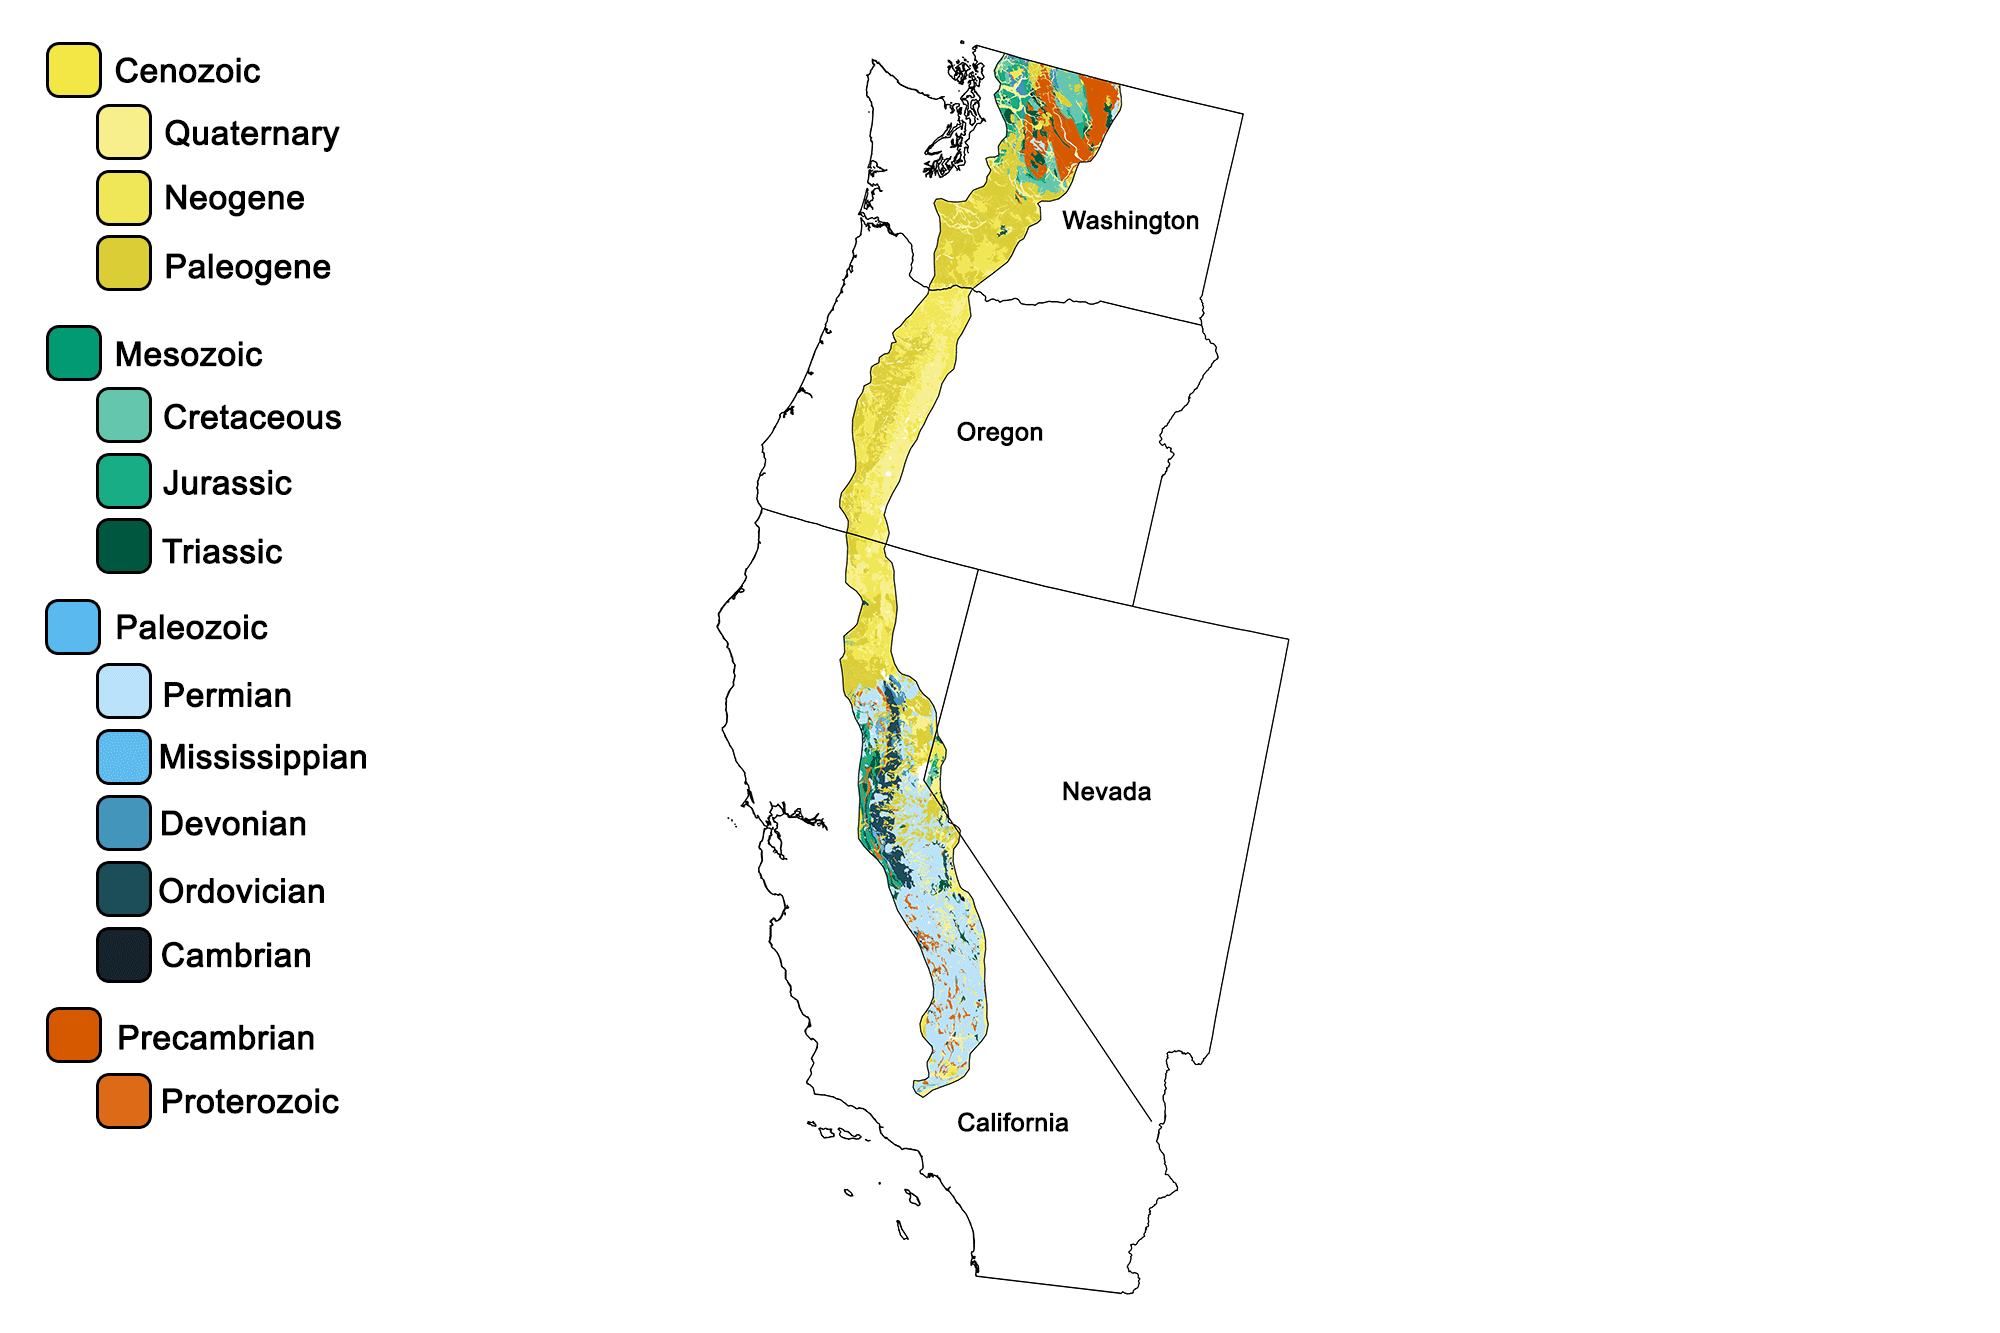 Geologic map of the Cascade and Sierra Mountains region of the western United States.